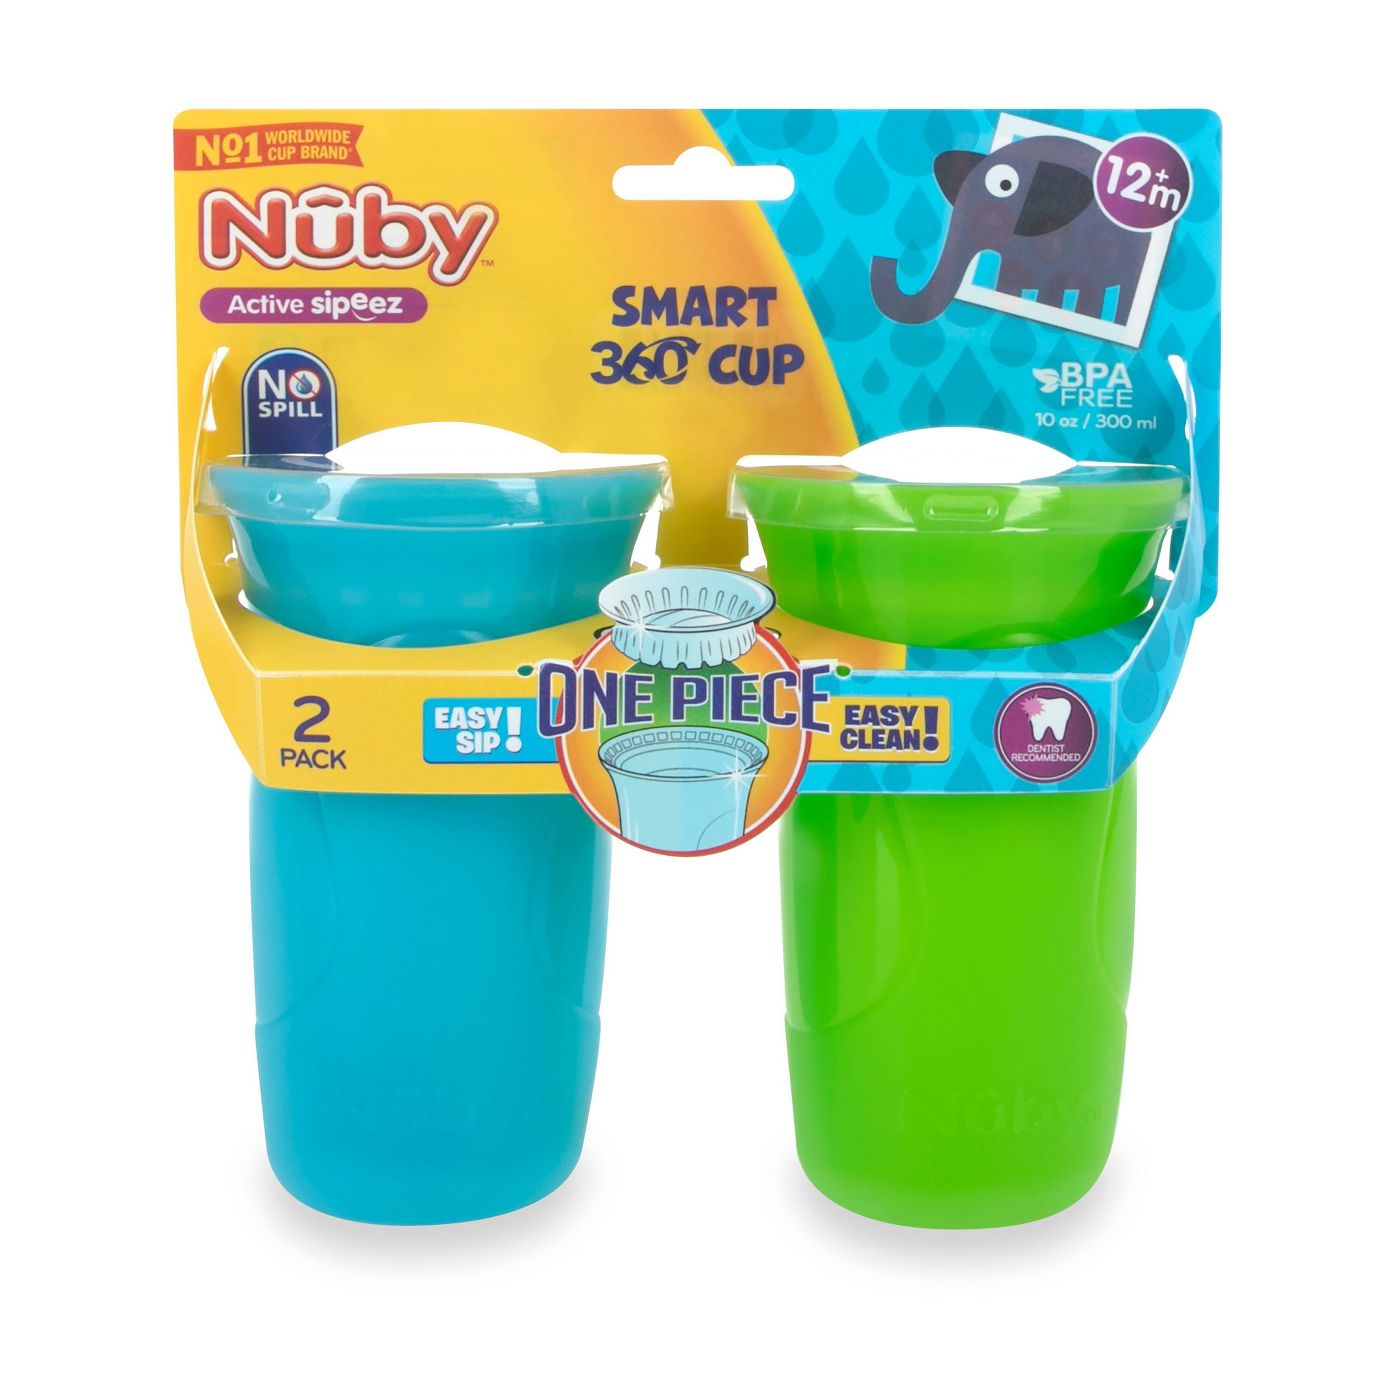 Nuby 360 Edge Cup is a new favorite in our house!